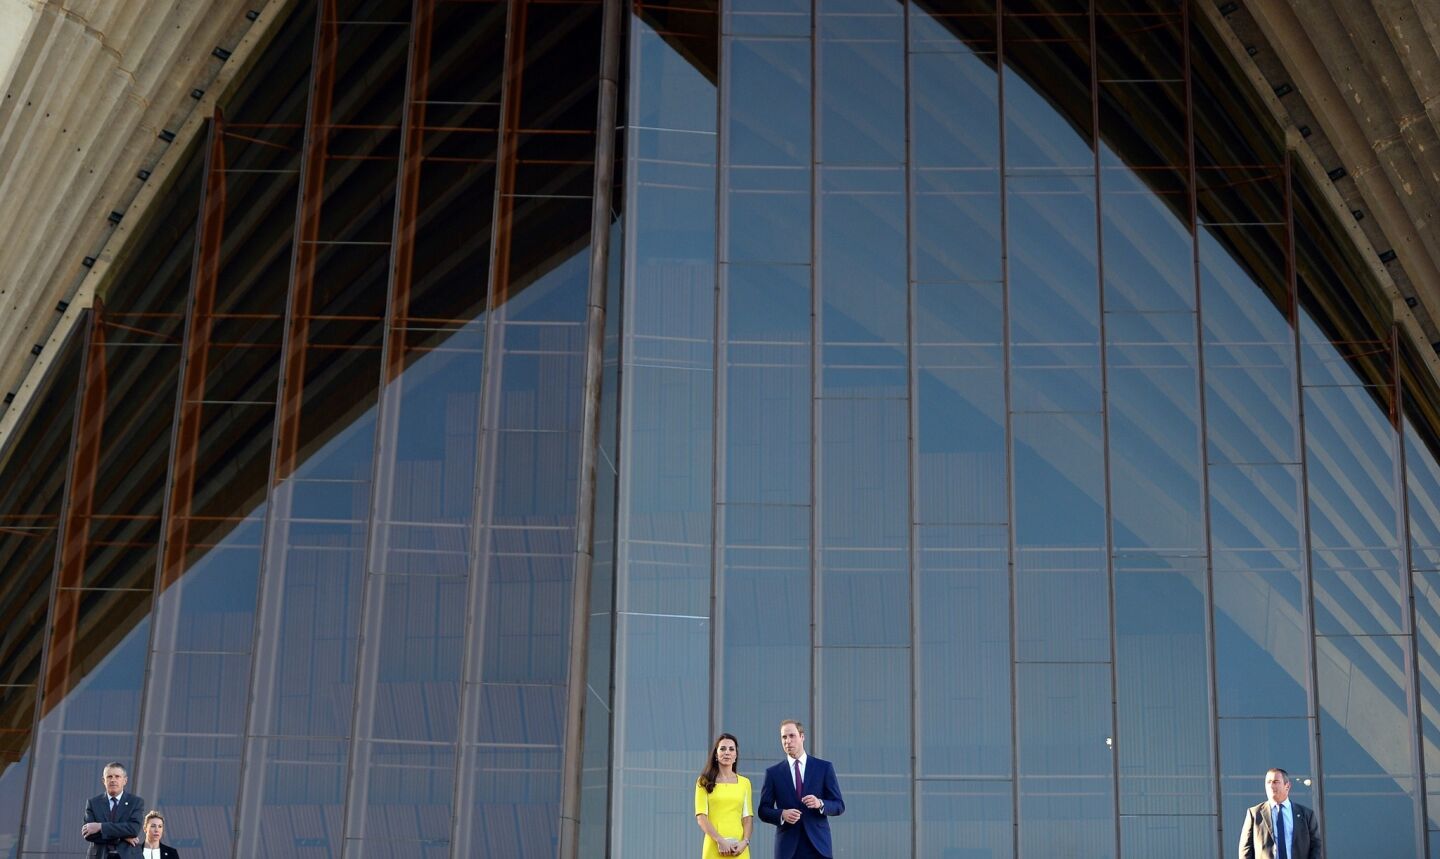 William and Catherine pose for photos on the stairs of the iconic Sydney Opera House.